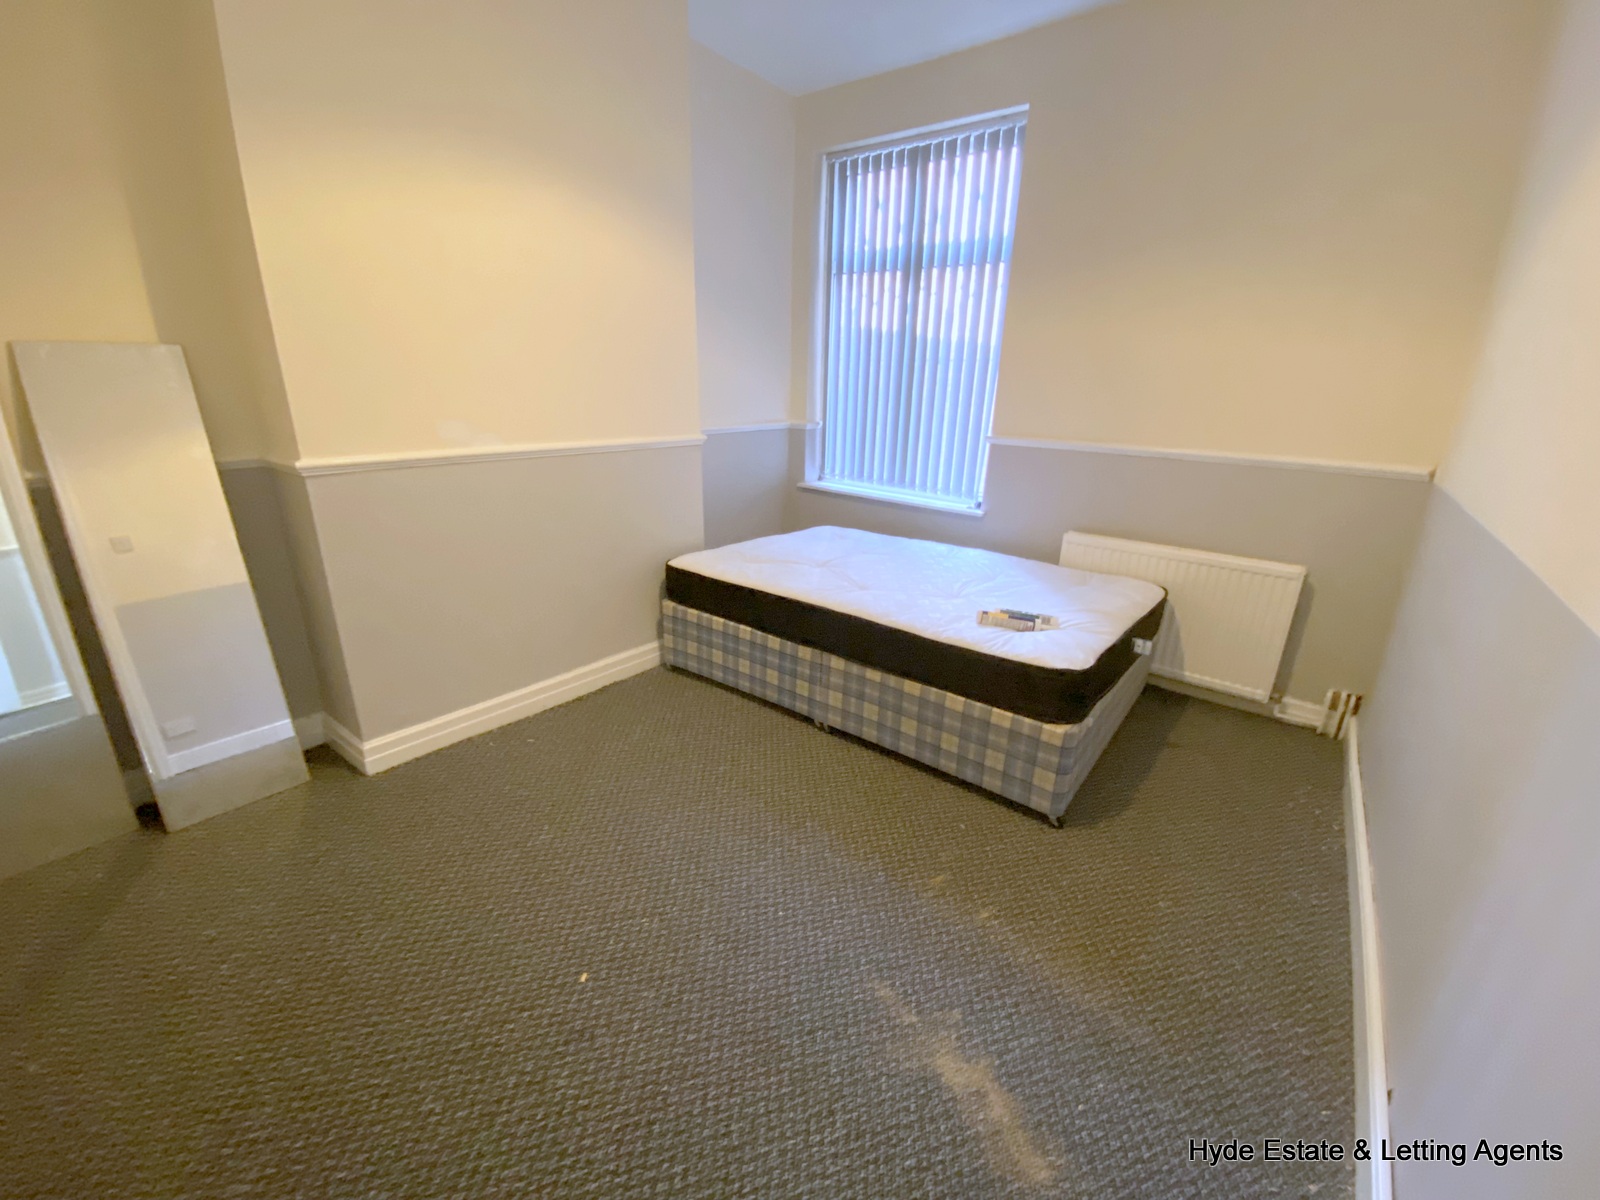 Images for Ash Tree Road, Crumpsal, Manchester, M8 5SA